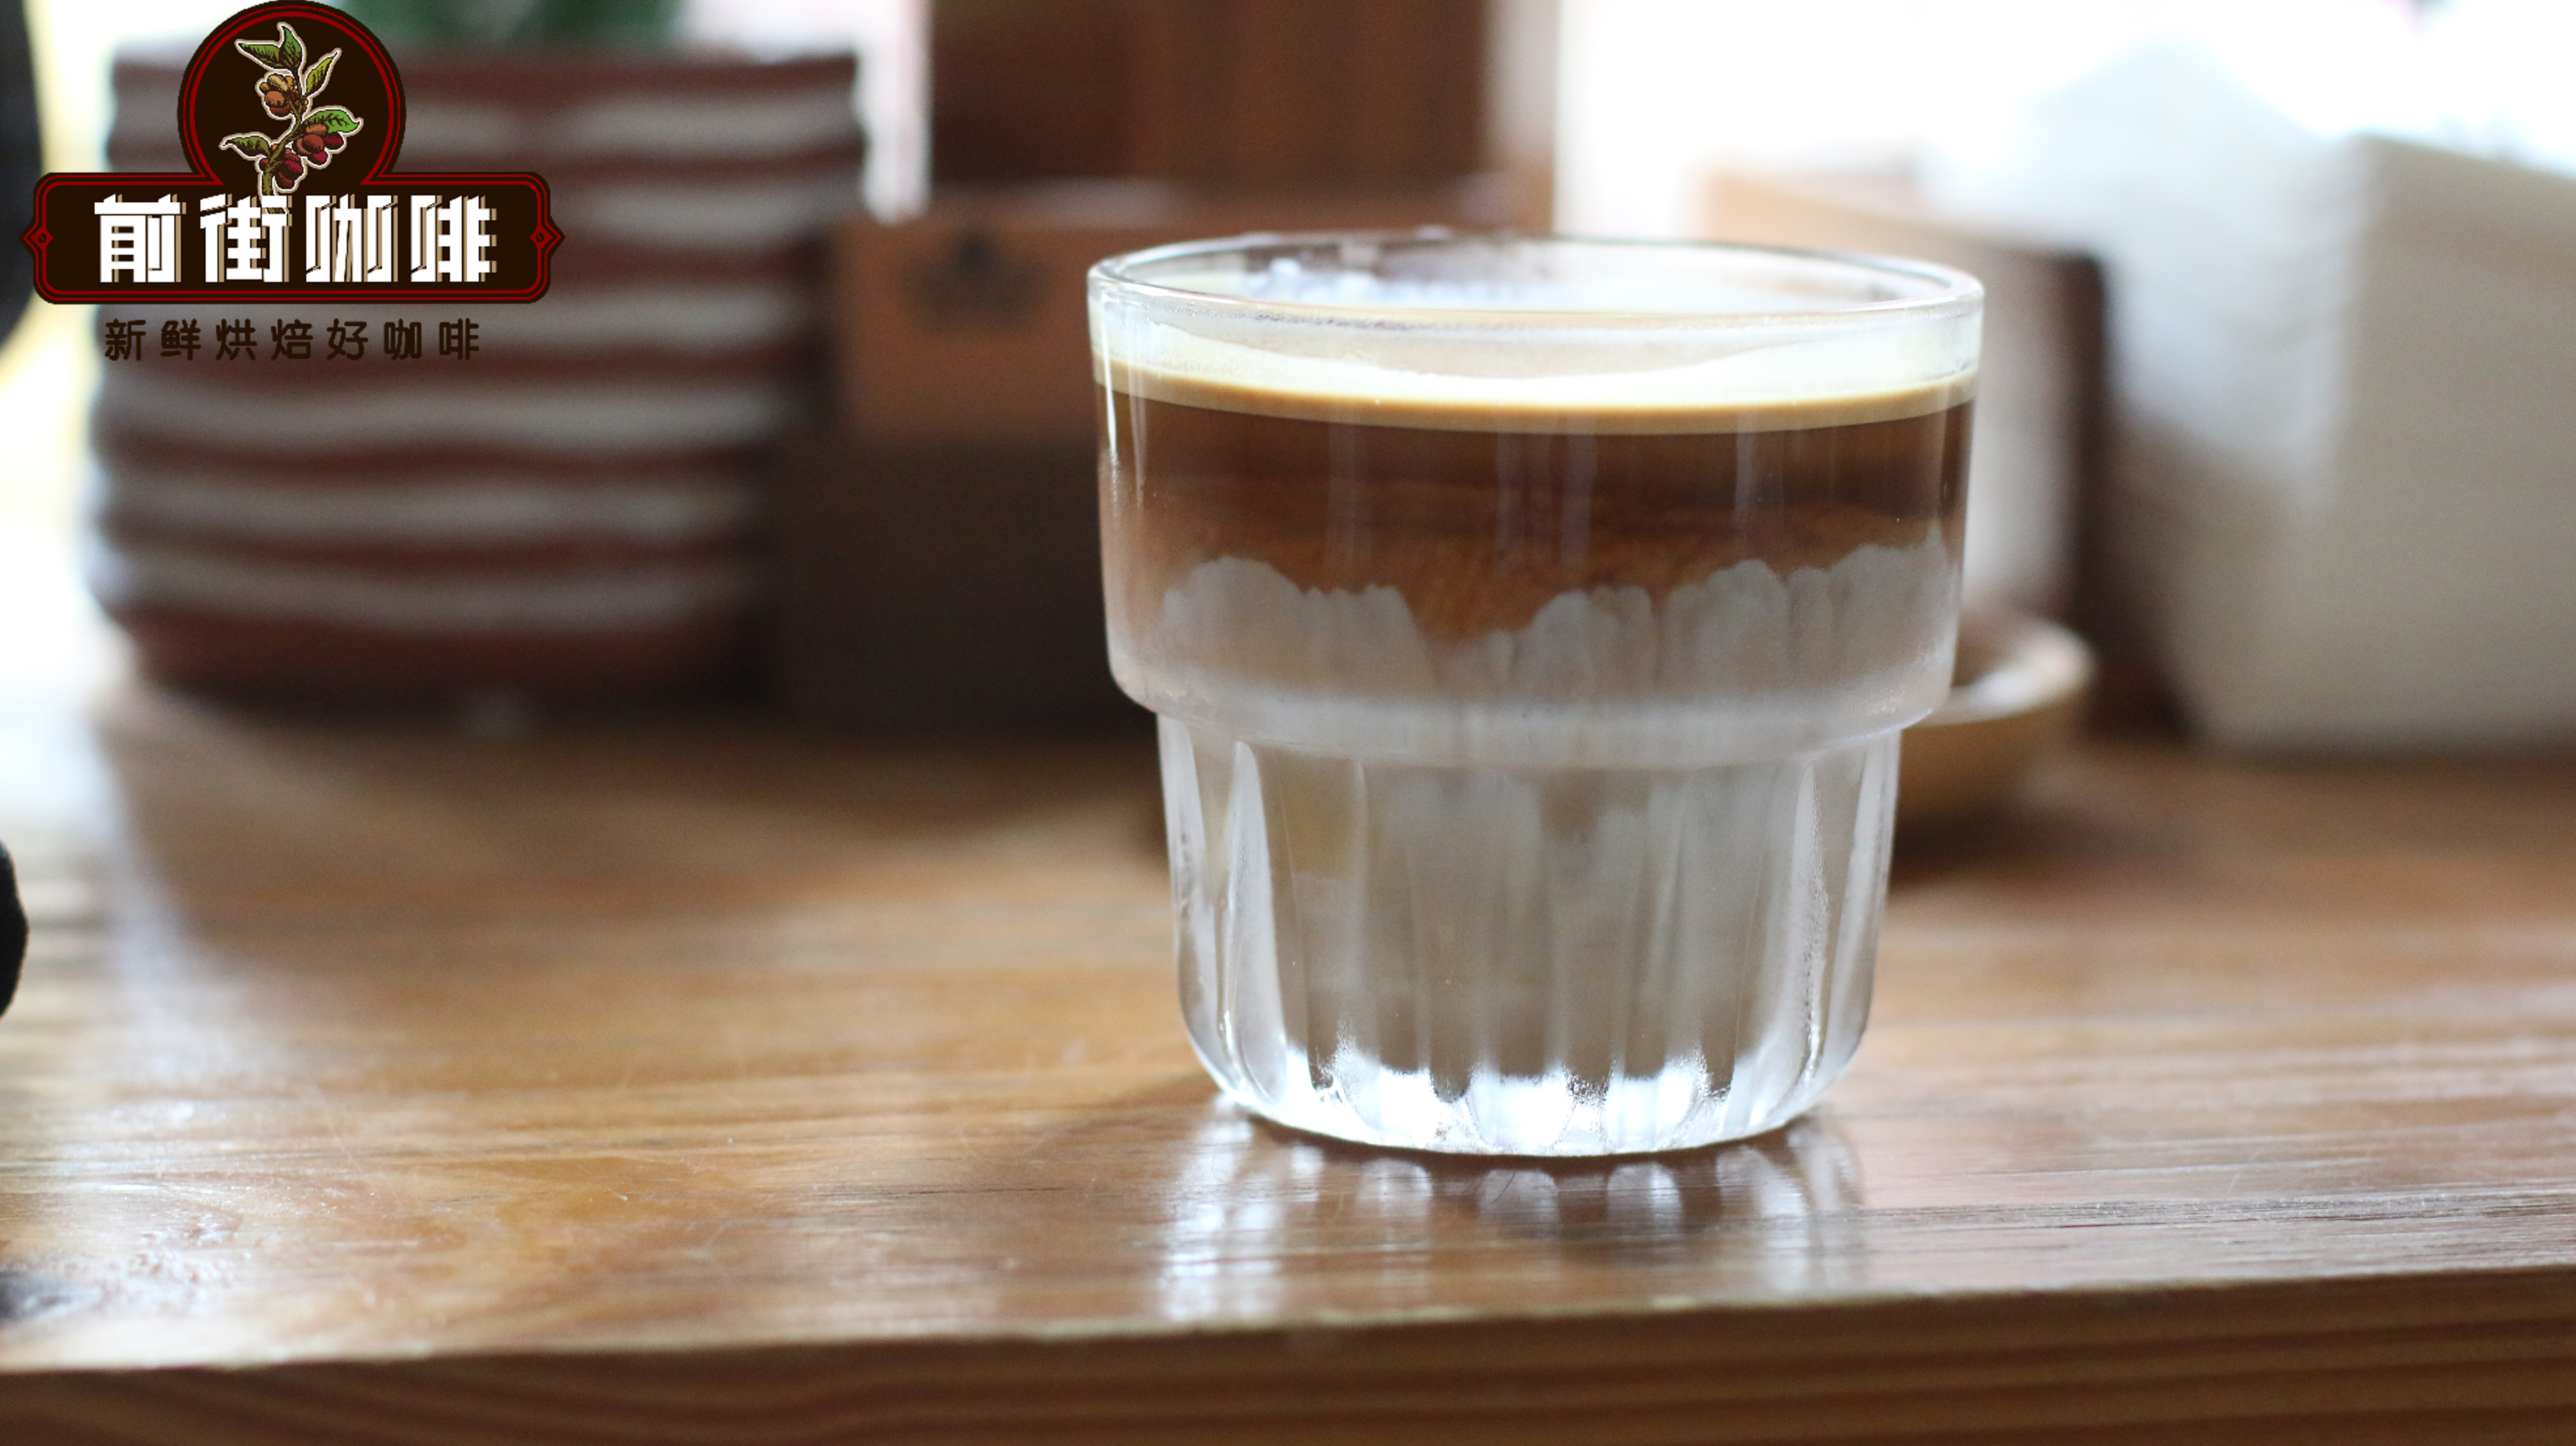 Do I have to use an ice cup for Dirty coffee? How to make milk coffee layered by Dirty production method?